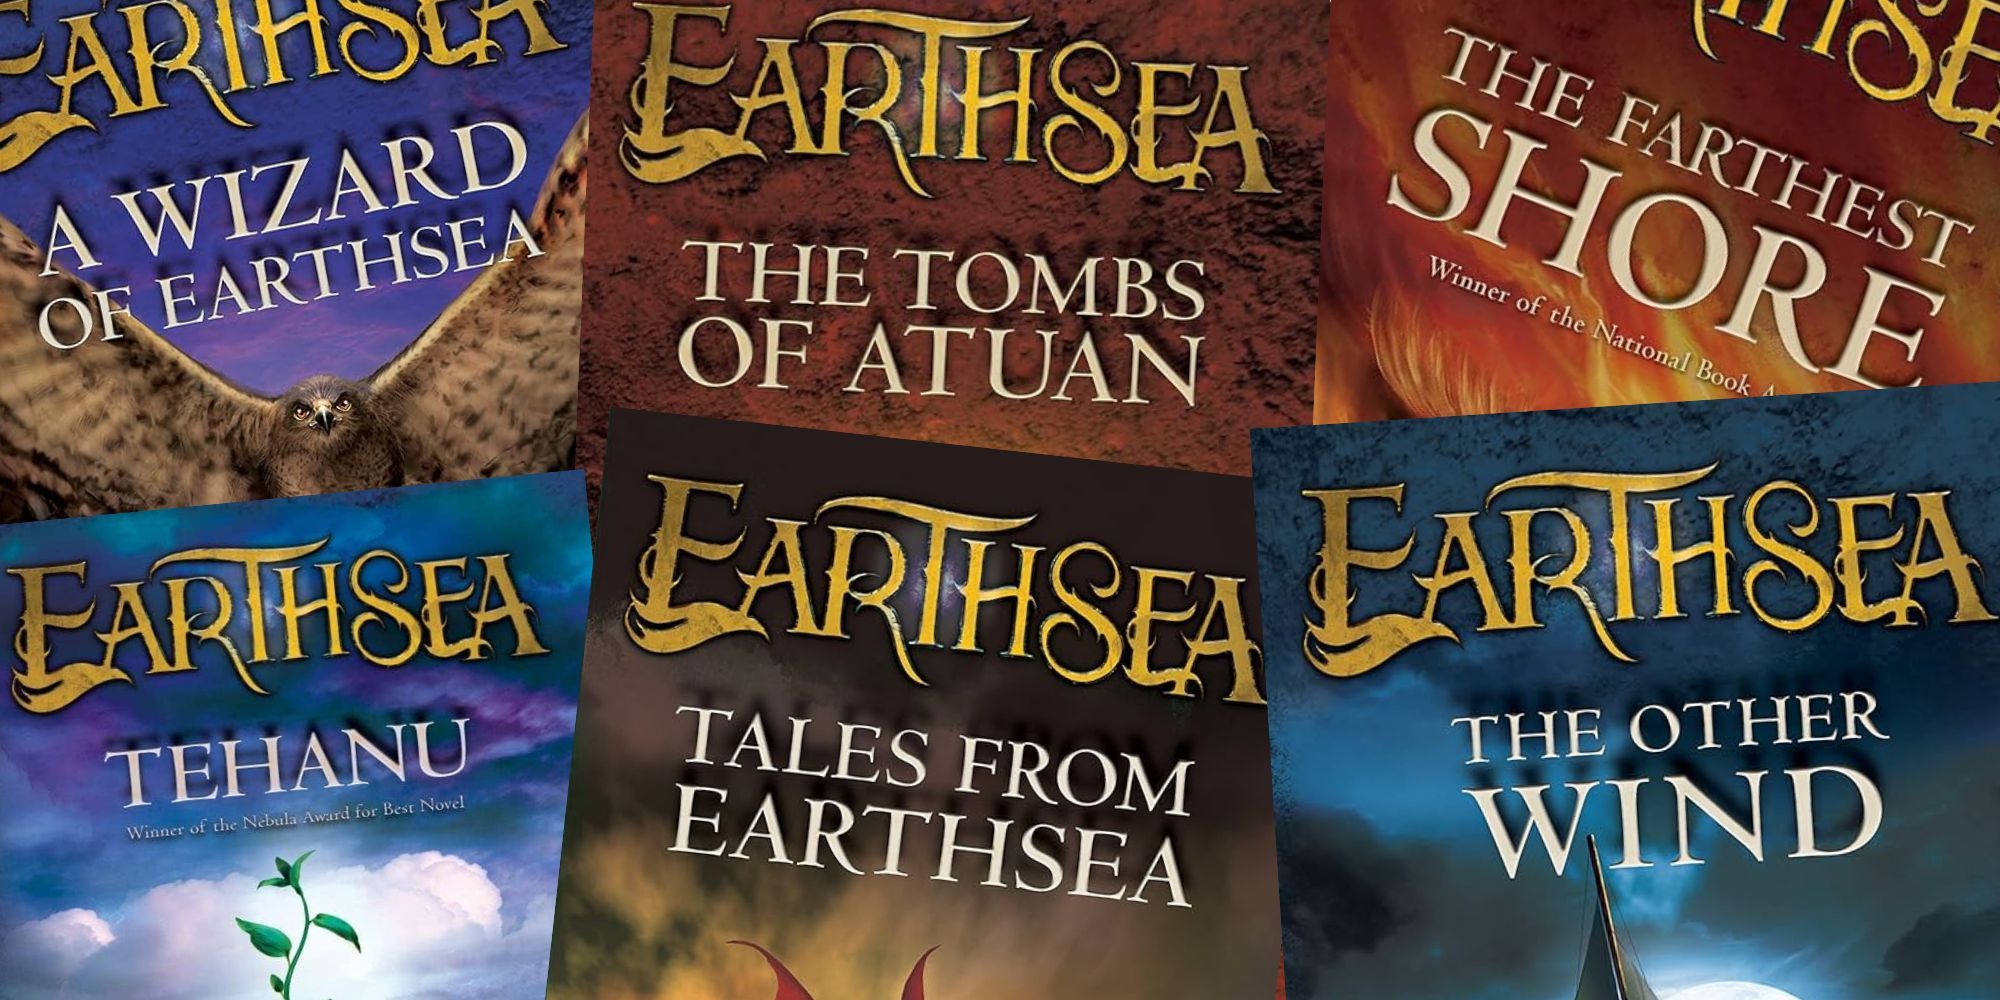 Collage of Earthsea book covers